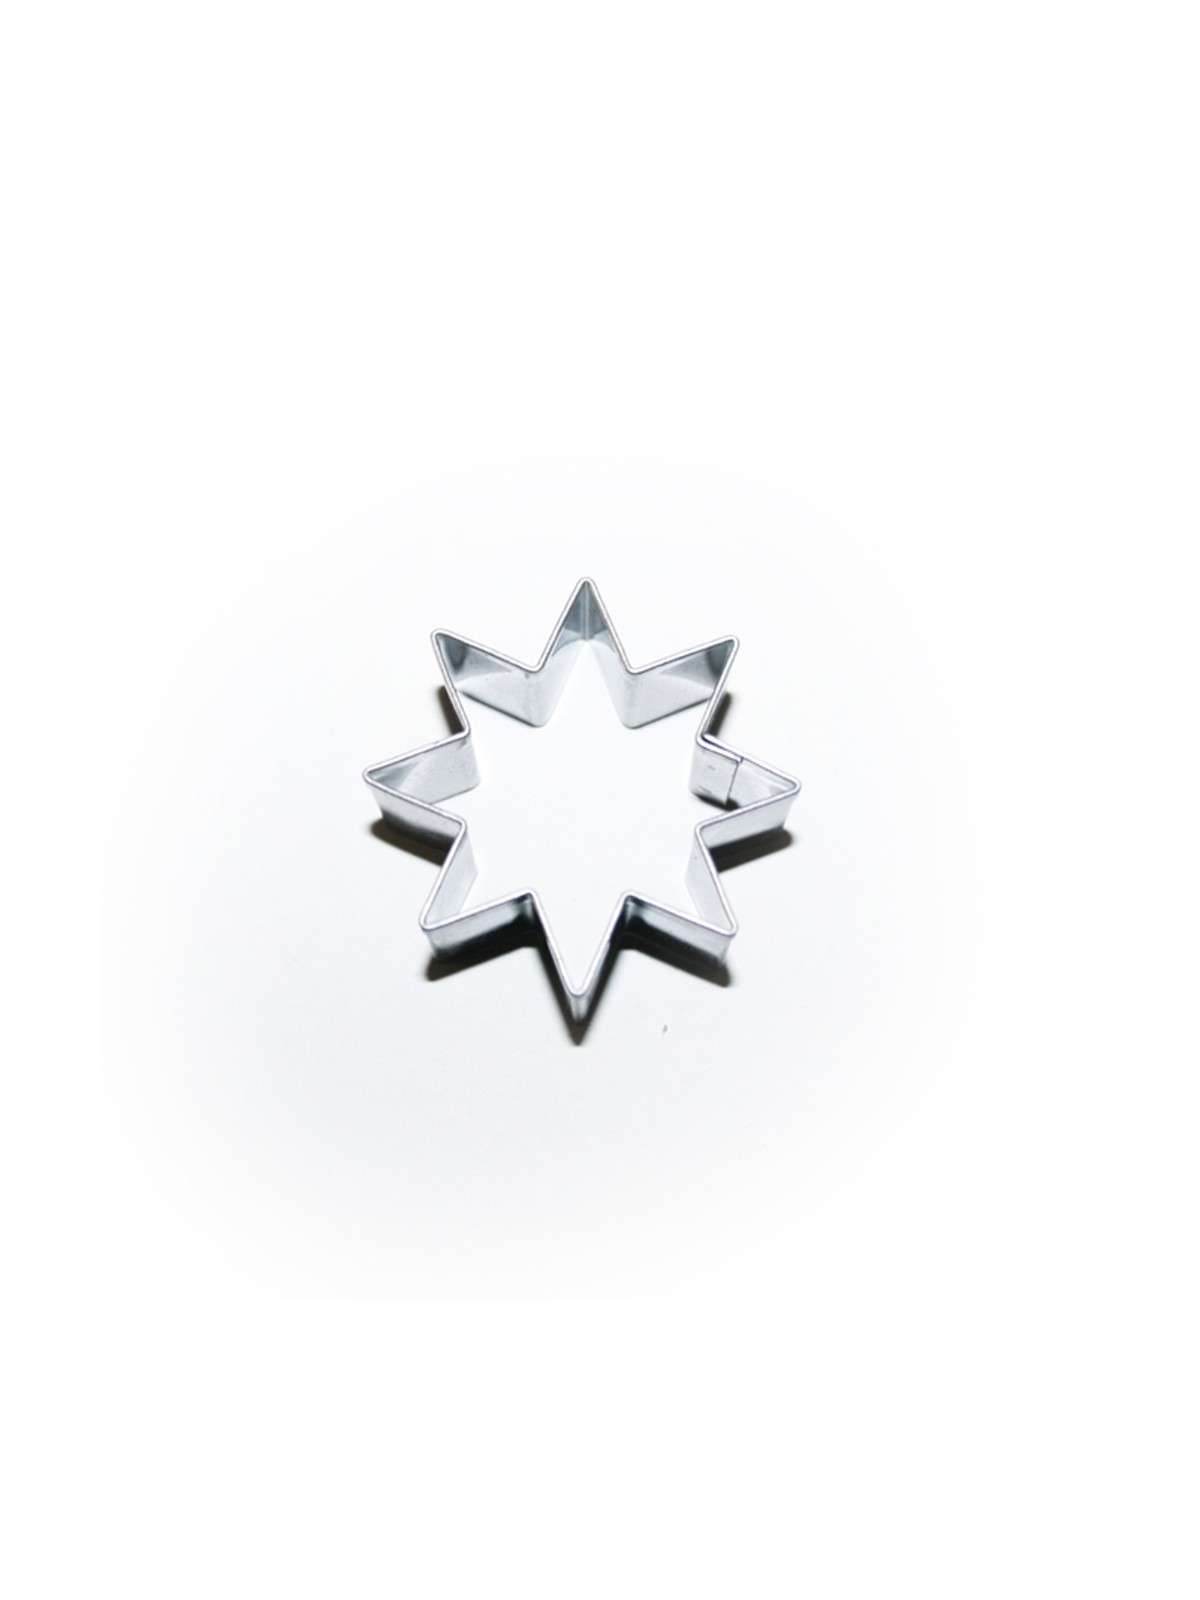 Stainless steel cutter - 8-pointed star 60mm